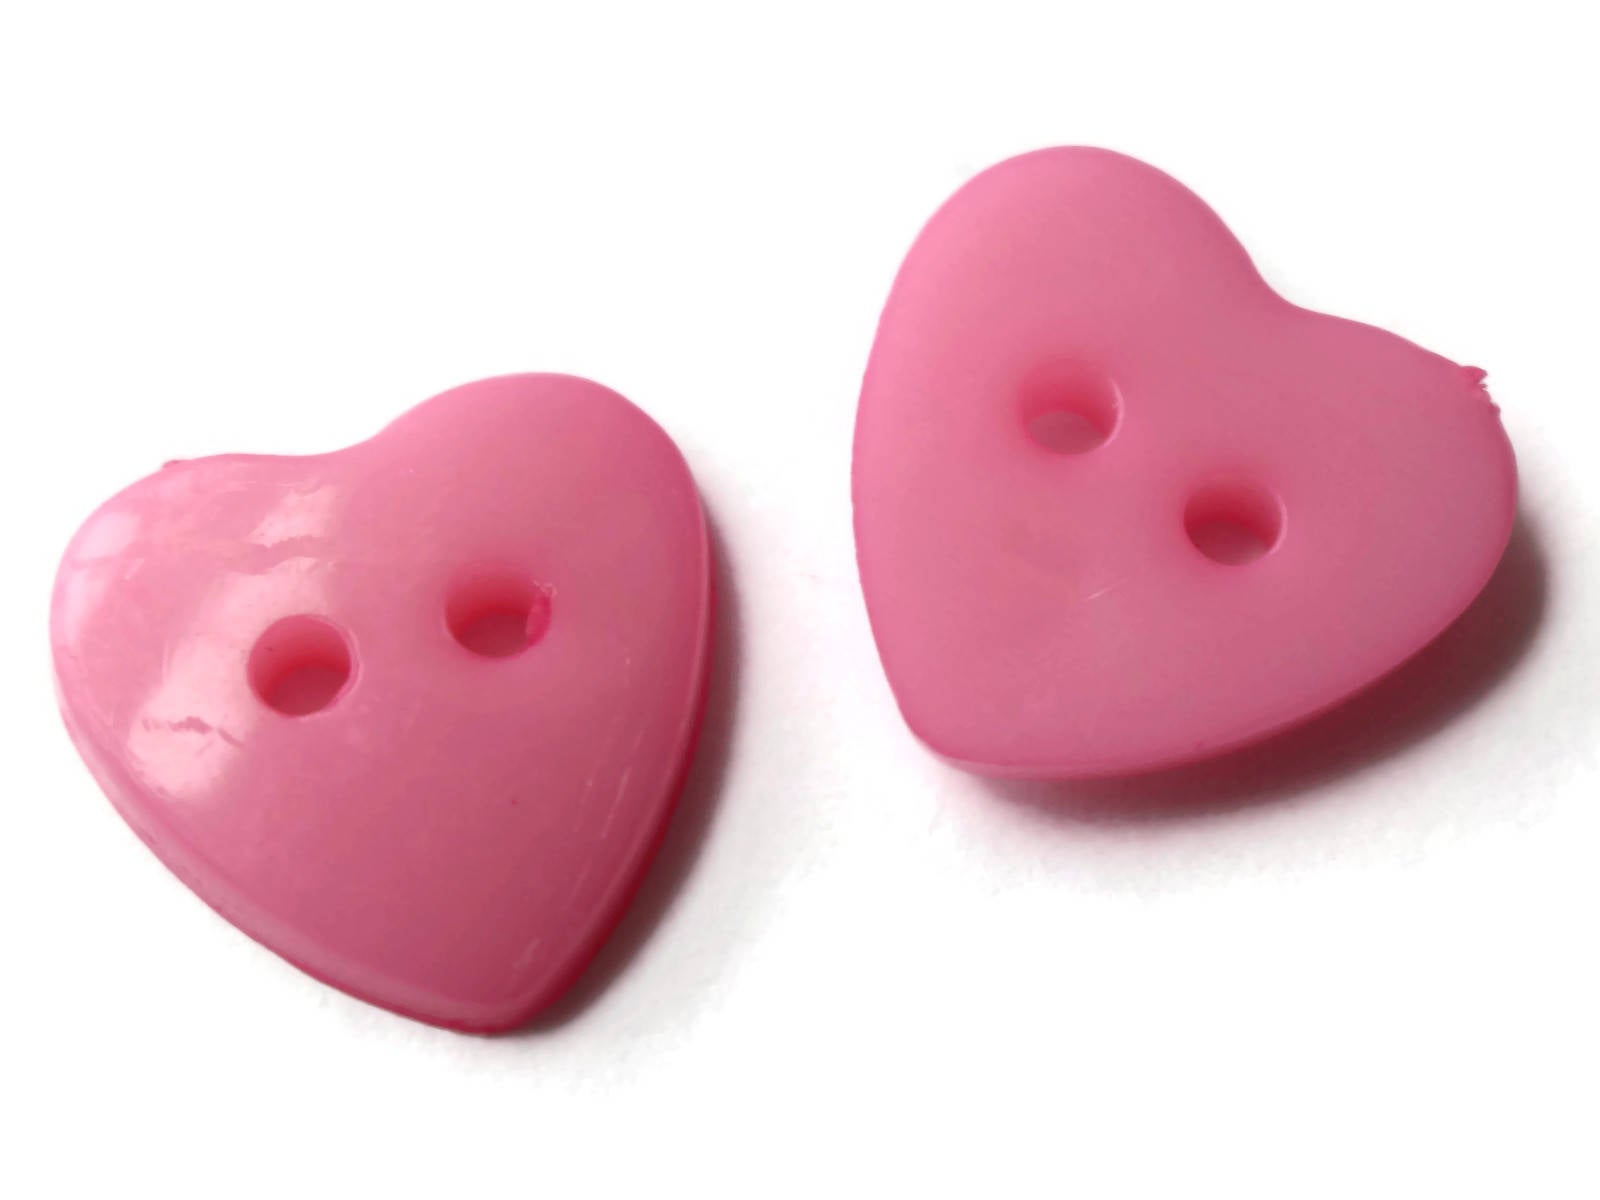 30 14mm Pink Heart Buttons Plastic Two Hole Buttons